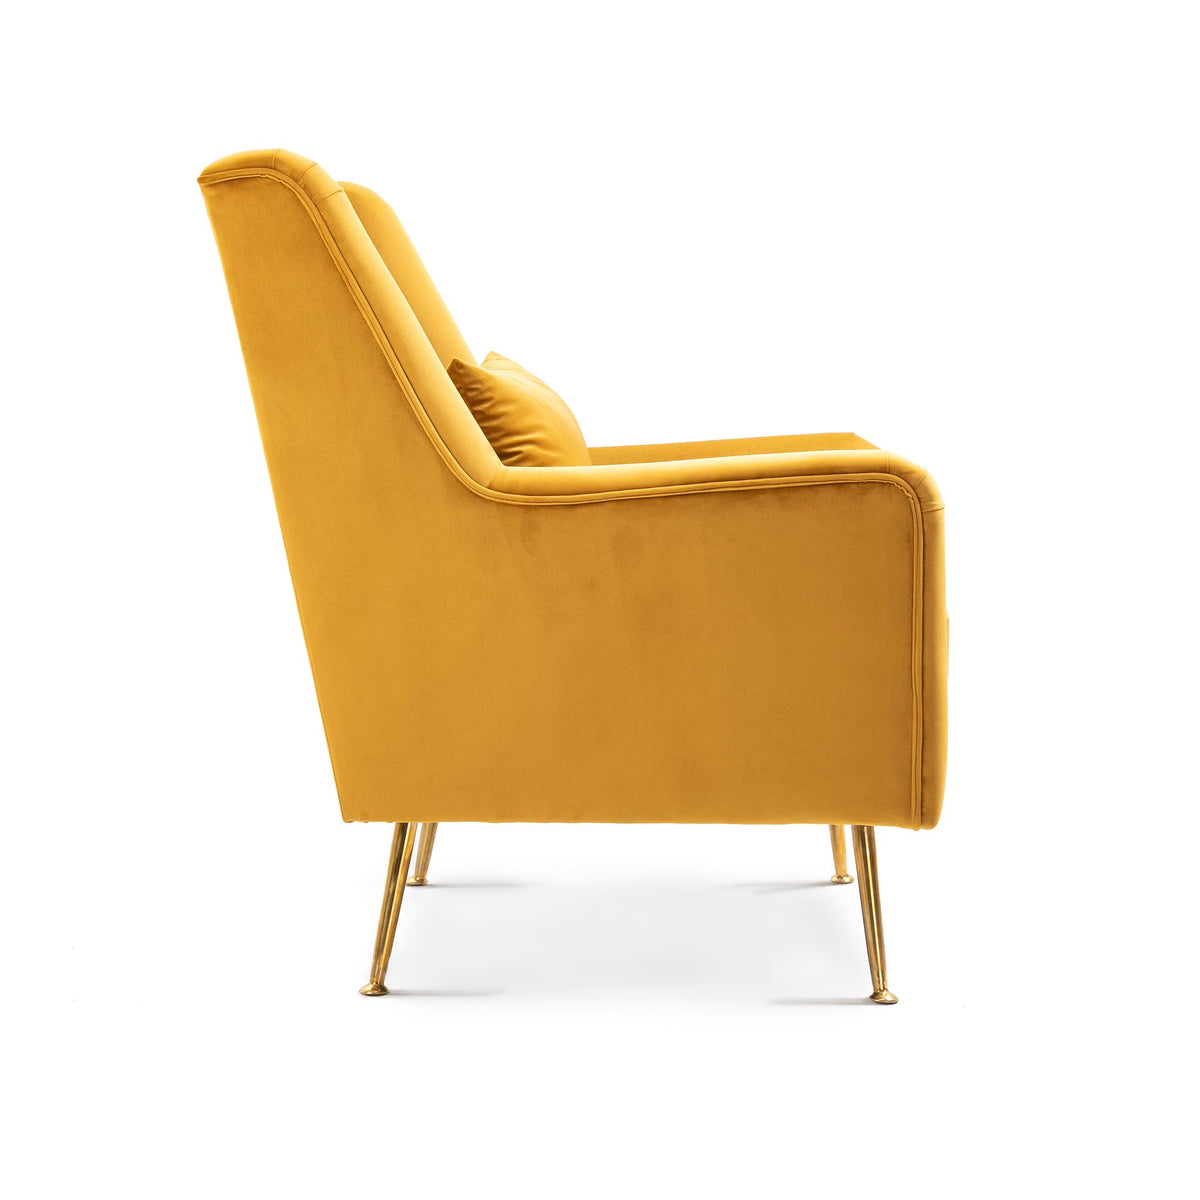 side view of the Mustard Yellow Velvet Wingback Armchair